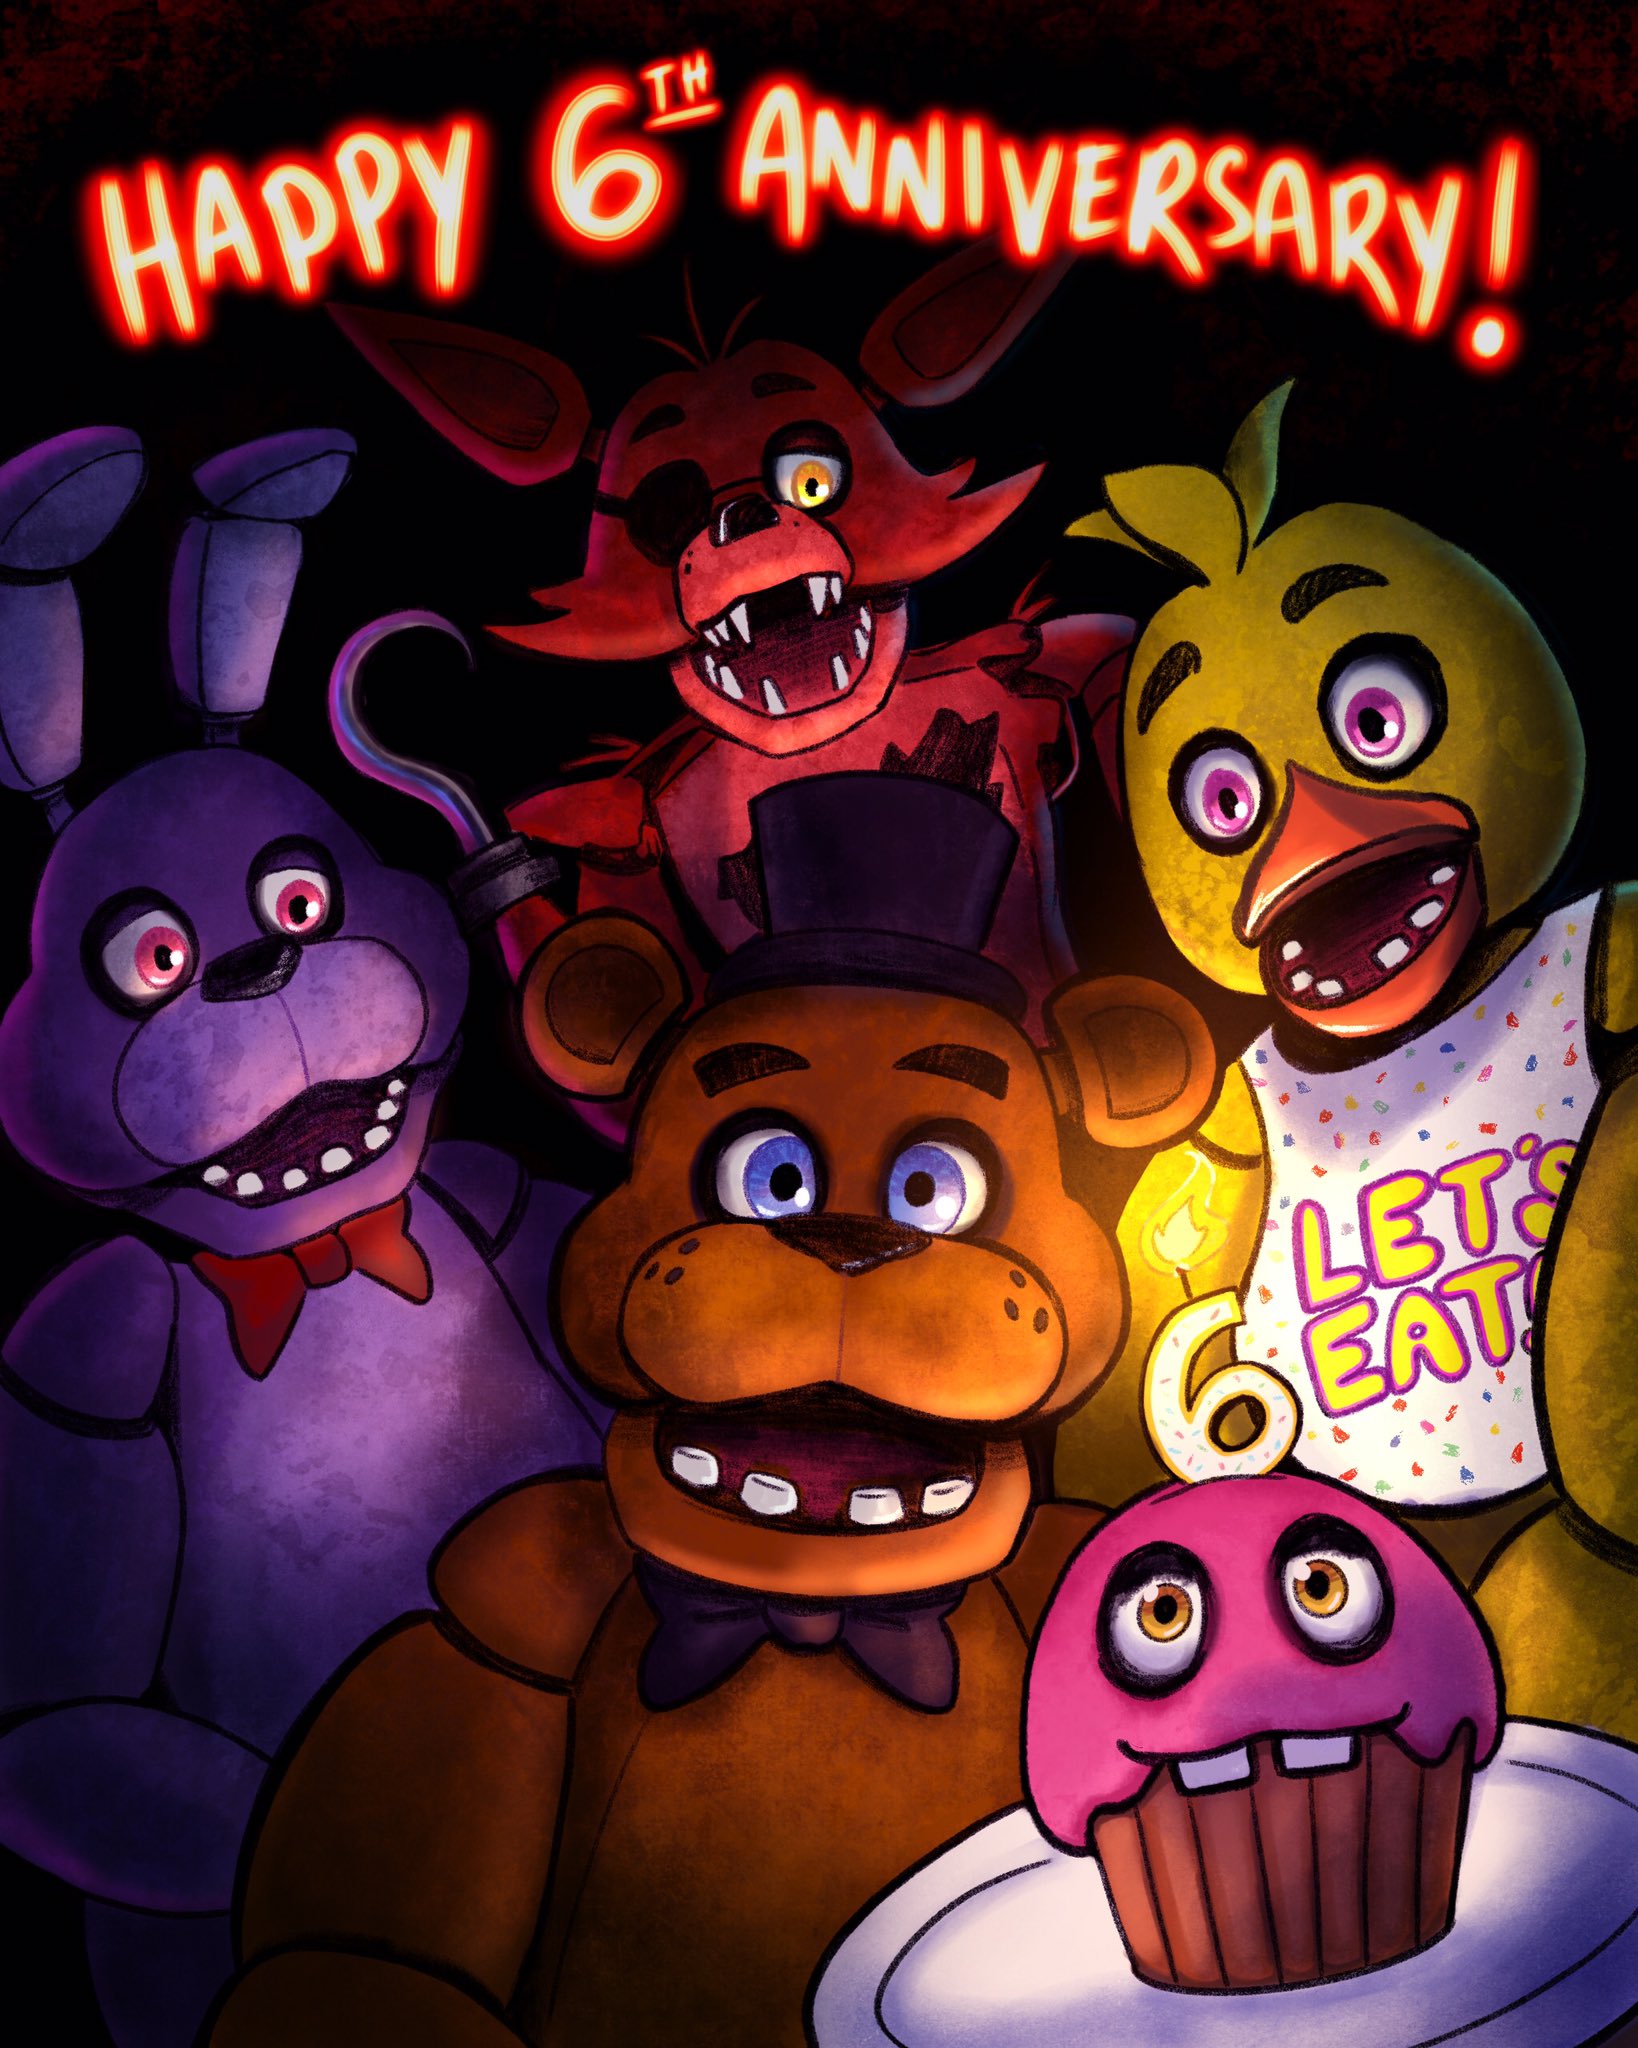 Steel Wool Studios on Twitter: "Happy 6th Anniversary to FNAF and the  community! One of our amazing Concept Artists, @cakepaints, wanted to cook  up a sweet illustration as a solid and sincere